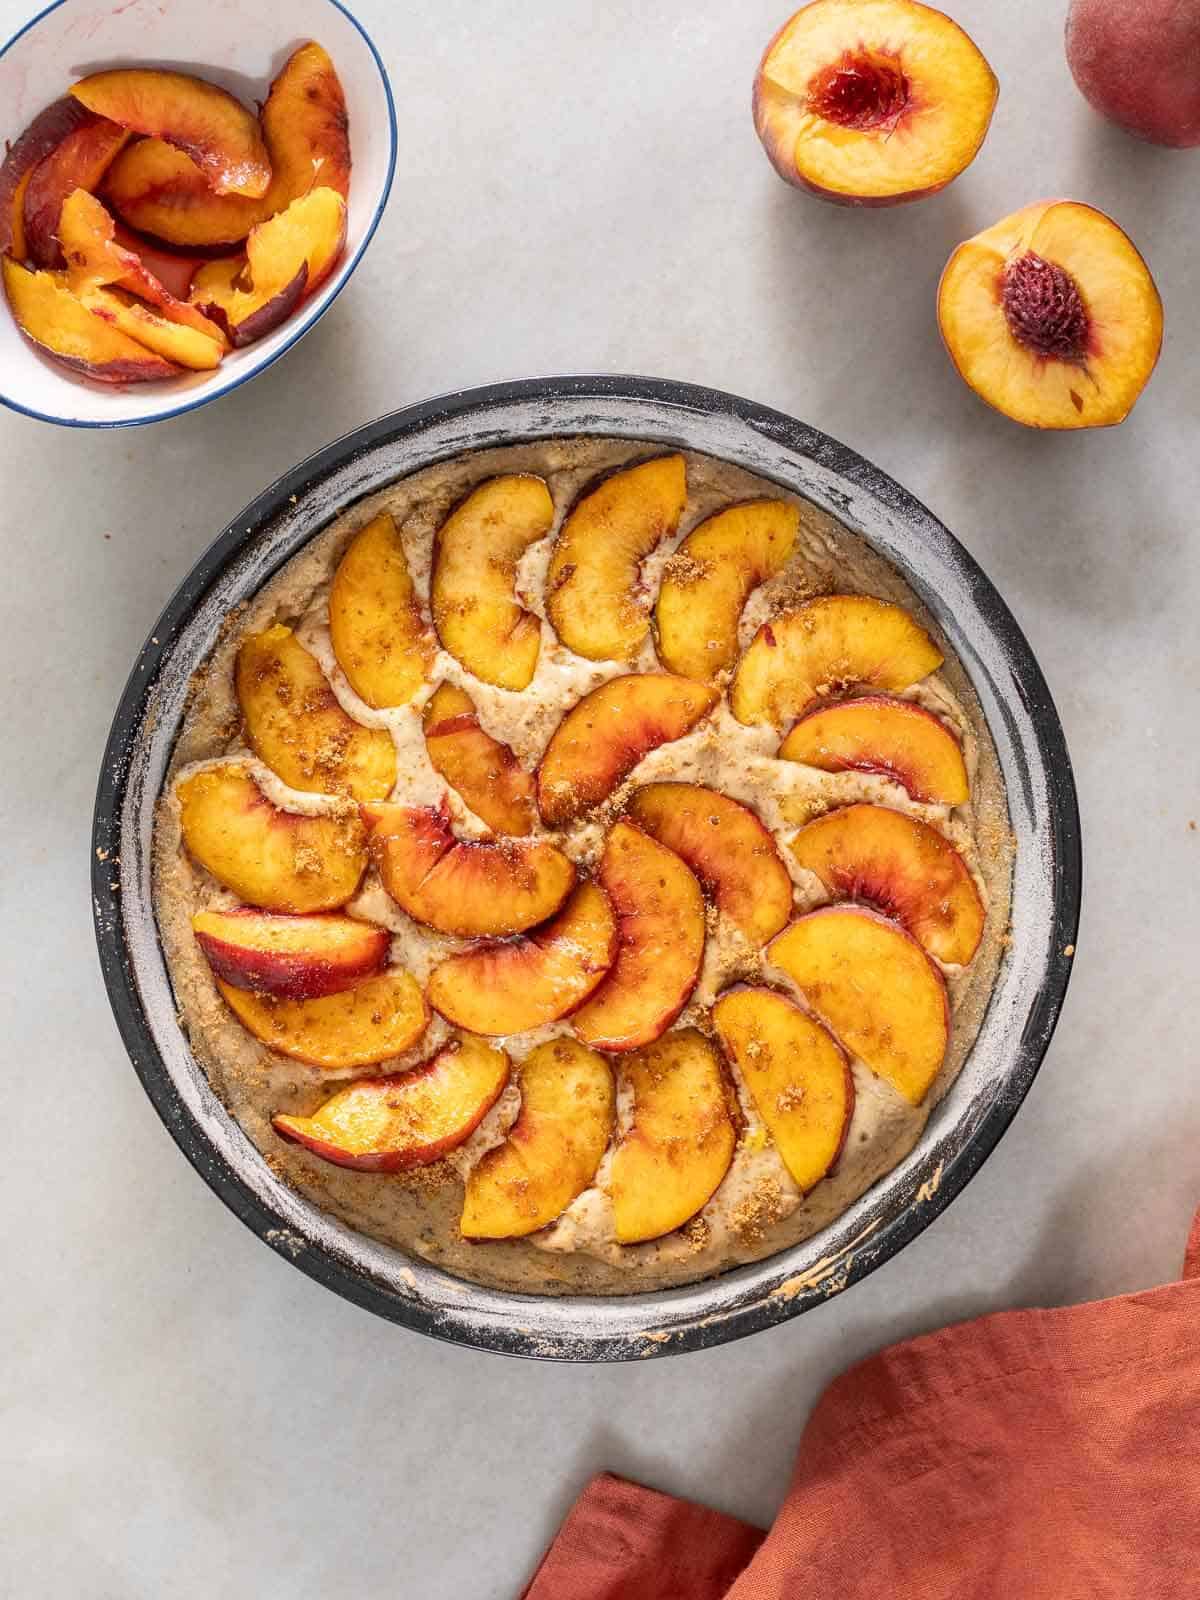 after 15 minutes in the oven add the peach sliced and sprinkle brown sugar on top.